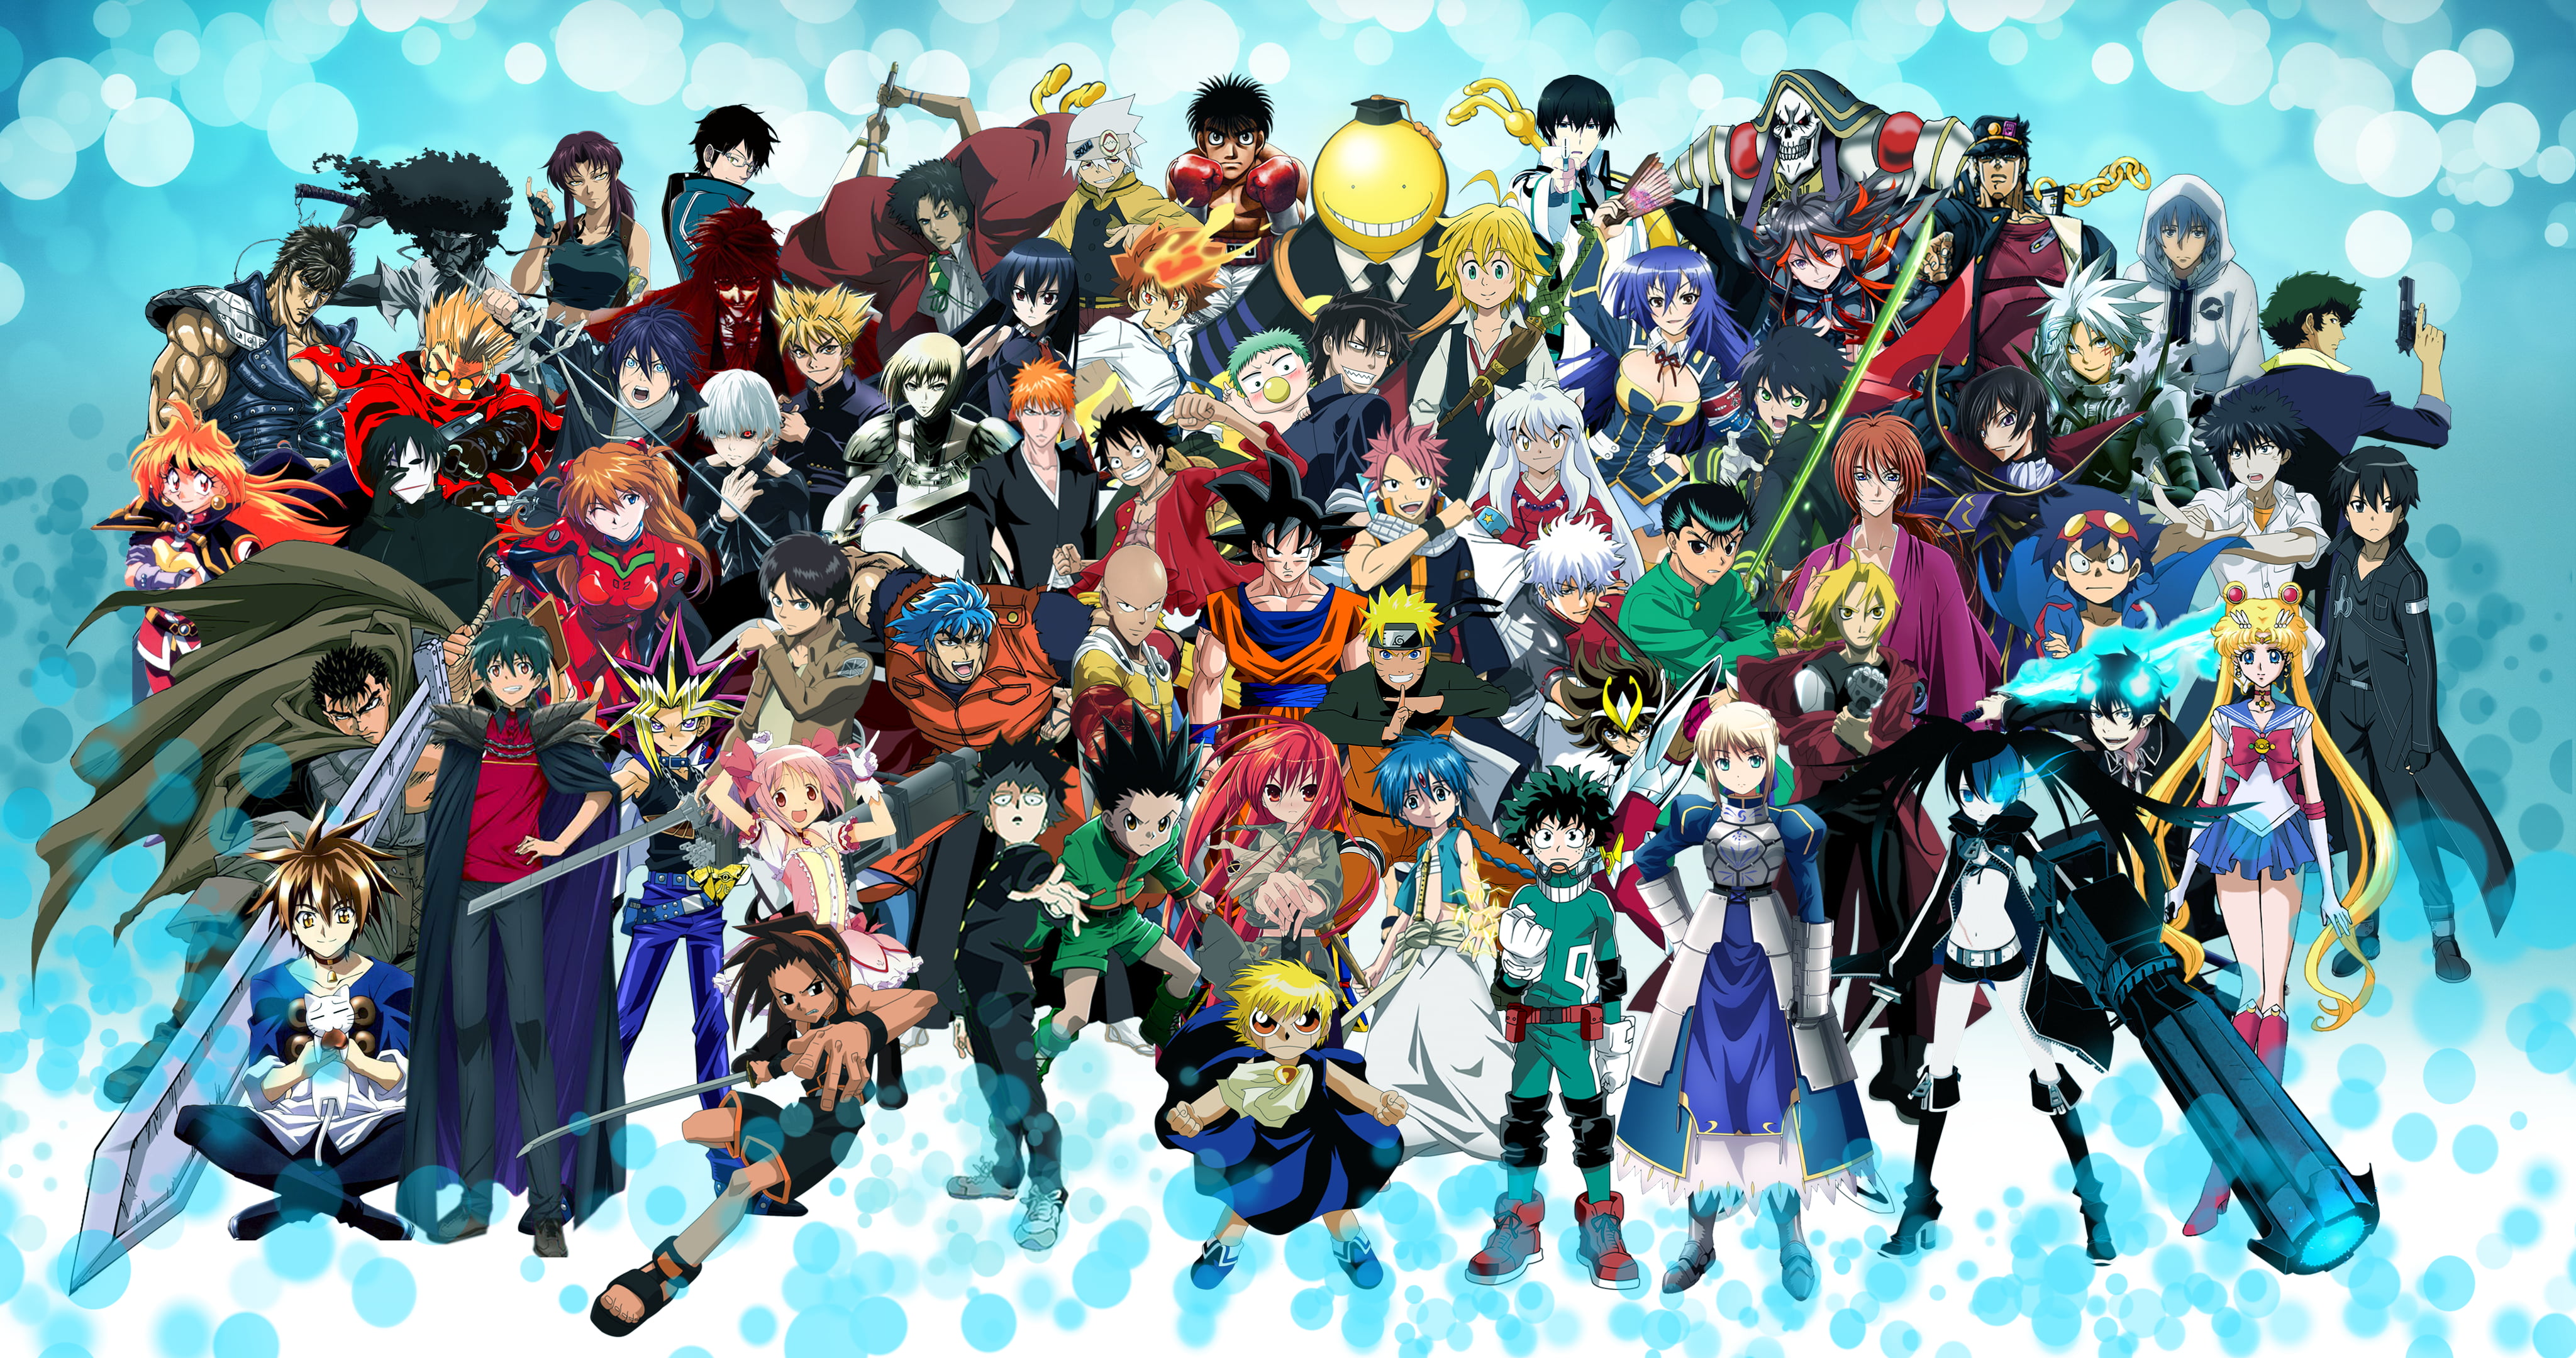 All Anime Characters Wallpaper Hd - 4096x2160 Wallpaper 